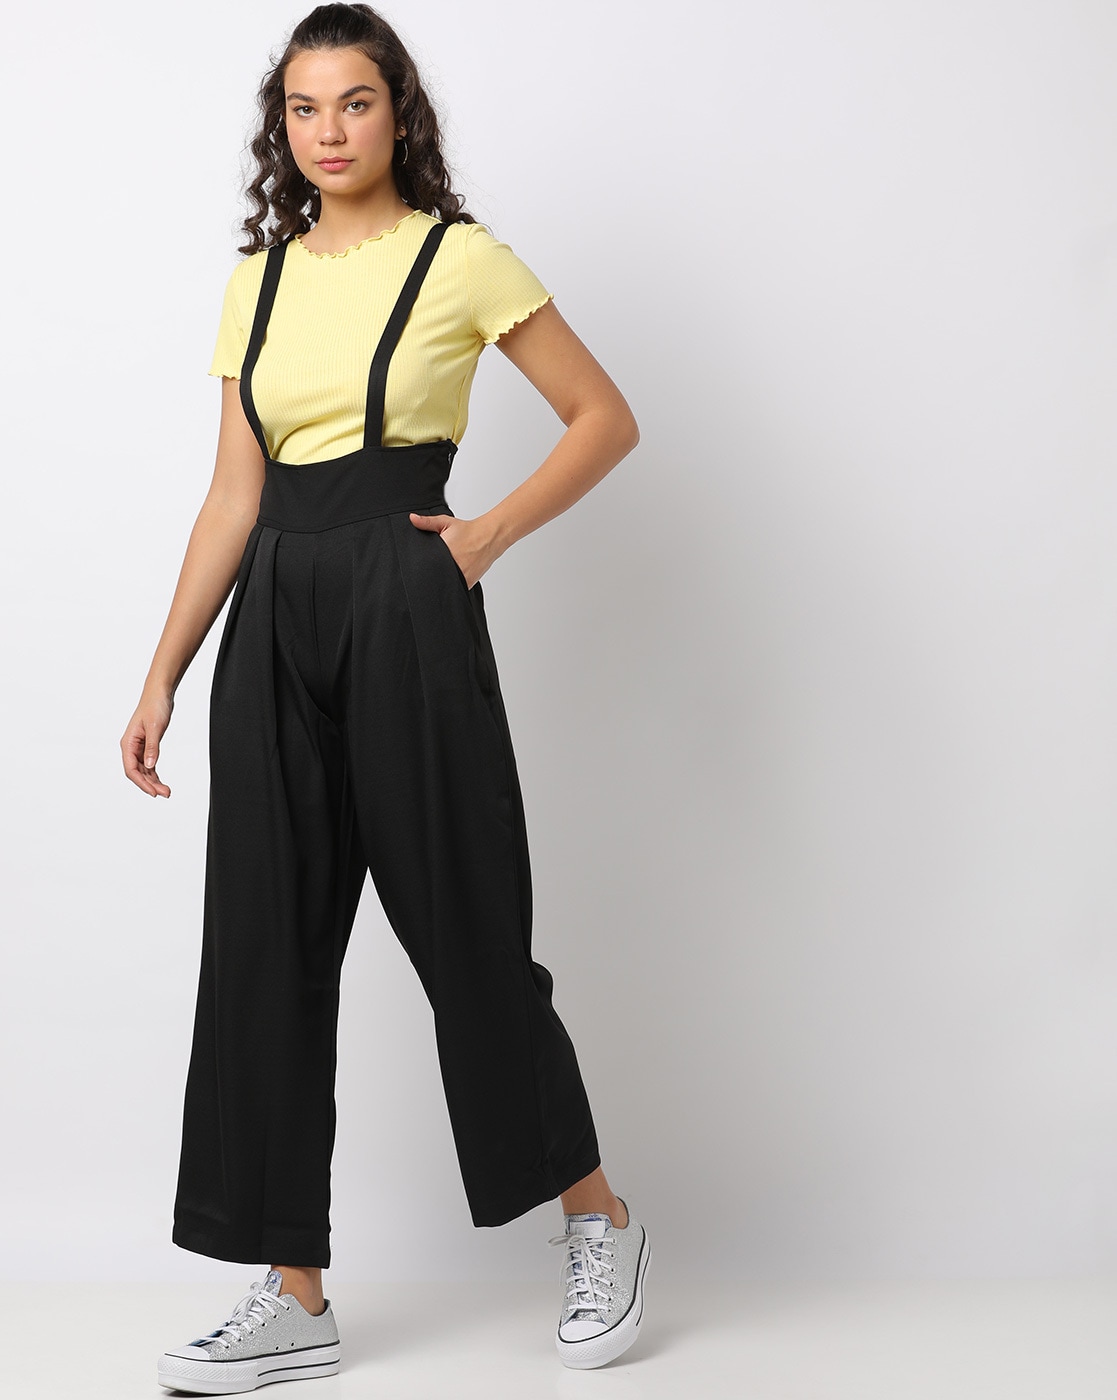 Dungarees  Buy Dungarees Dress for Women Online  Myntra